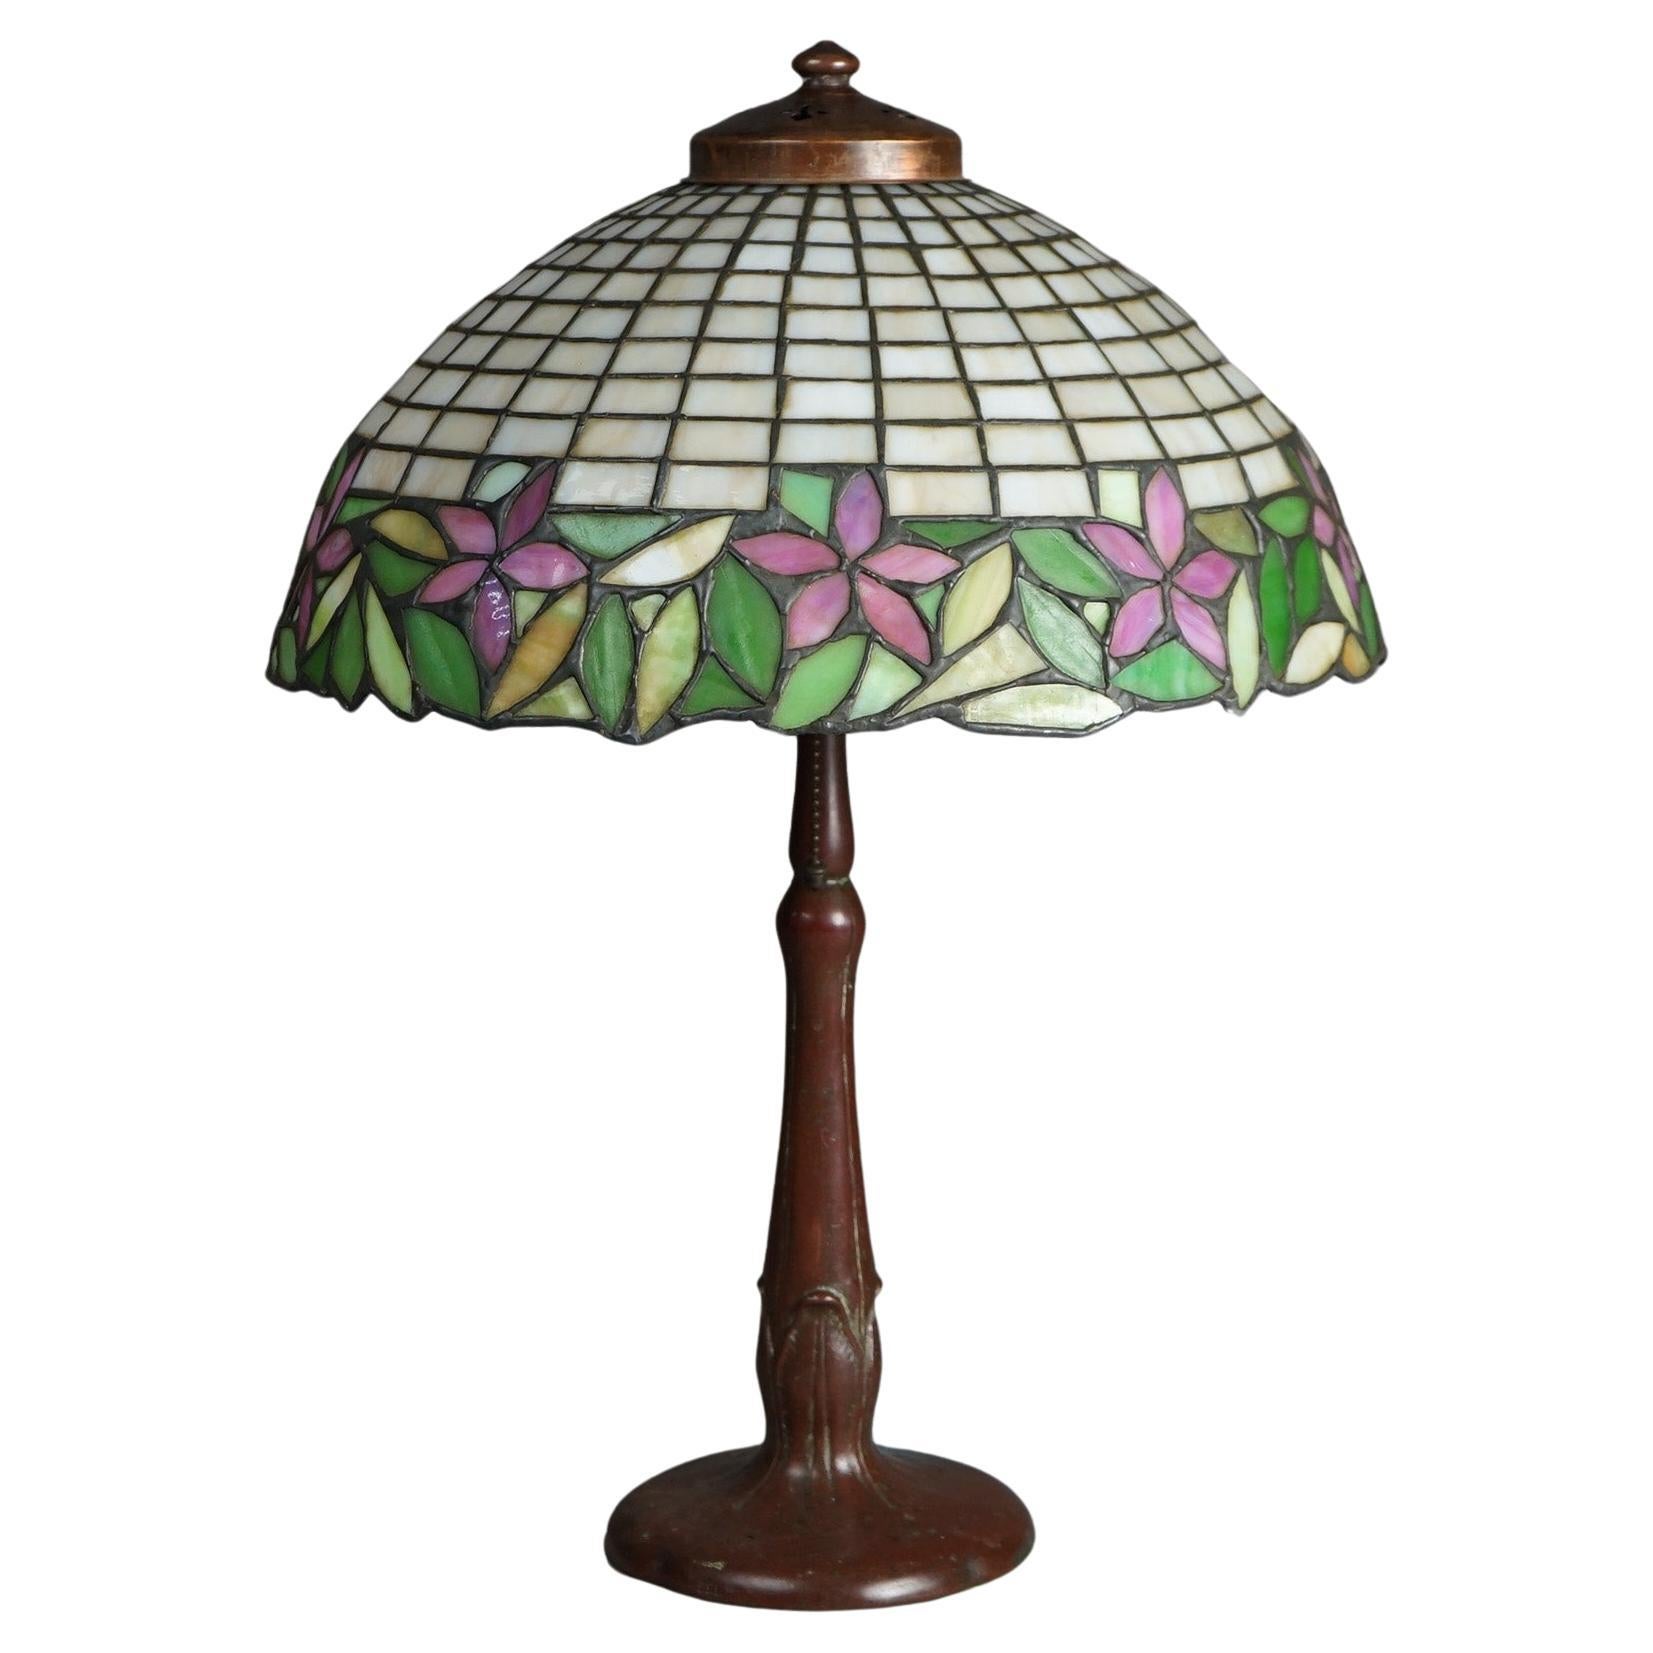 Antique Arts & Crafts Leaded Glass Lamp With Unique Shade & Handel Base c1920